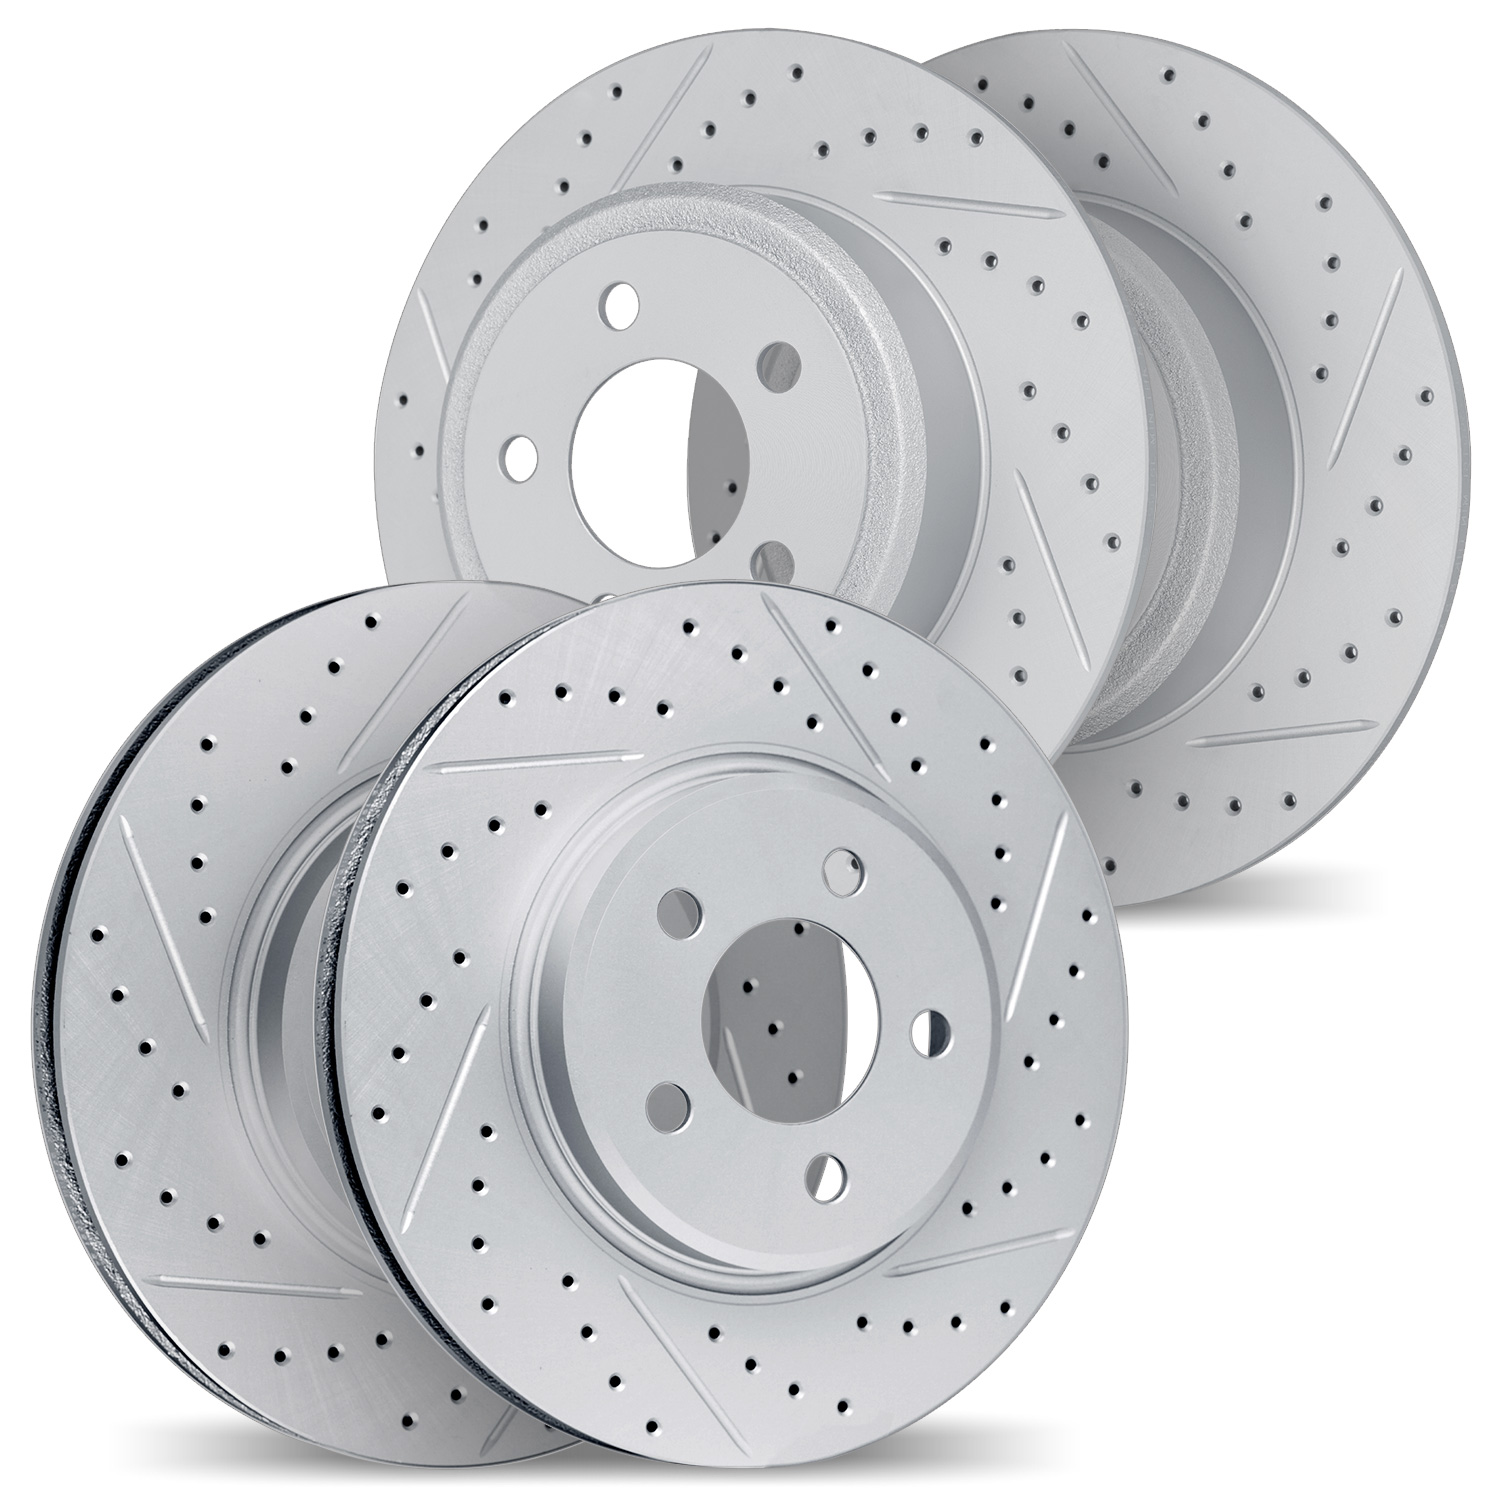 2004-59007 Geoperformance Drilled/Slotted Brake Rotors, 2013-2013 Acura/Honda, Position: Front and Rear